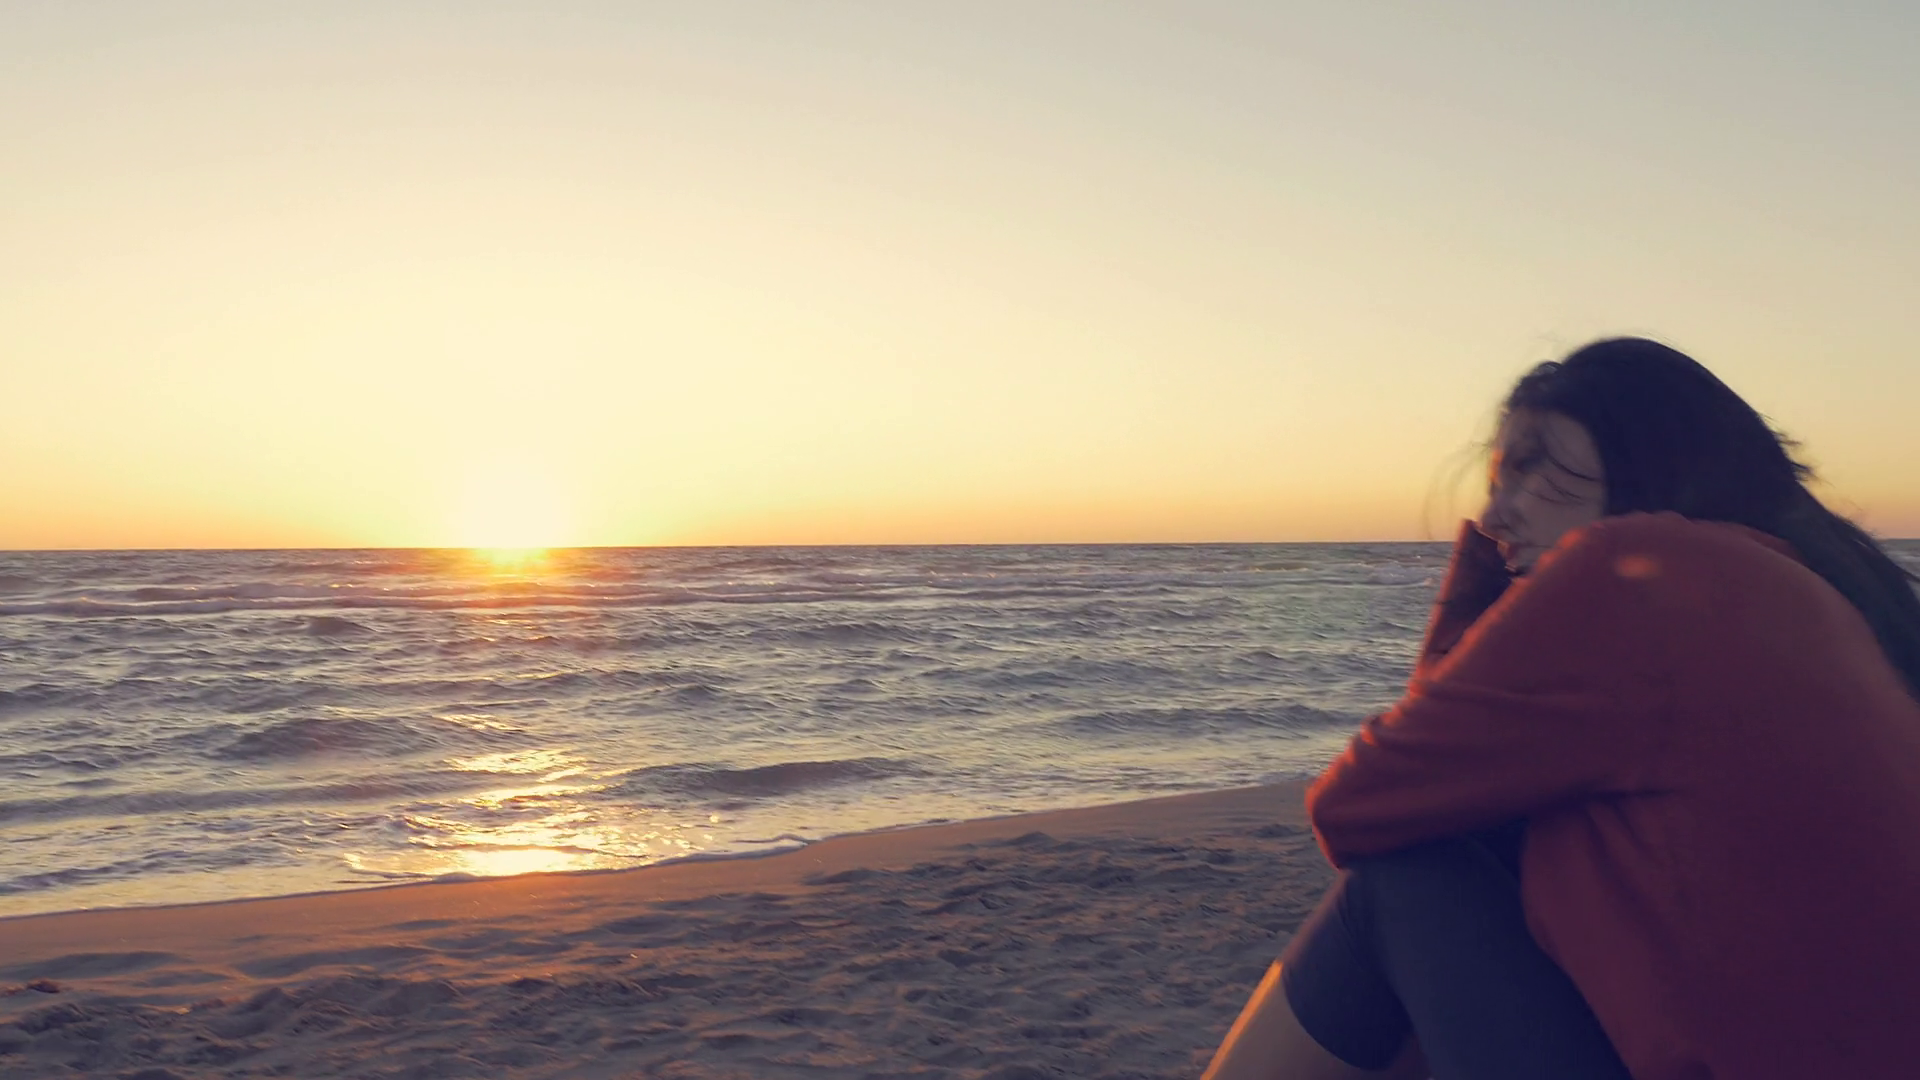 videoblocks-sad-woman-in-front-of-the-ocean-at-sunset-thinking-about-love-ronin-shot_hozj_jwnl_thumbnail-full04.png